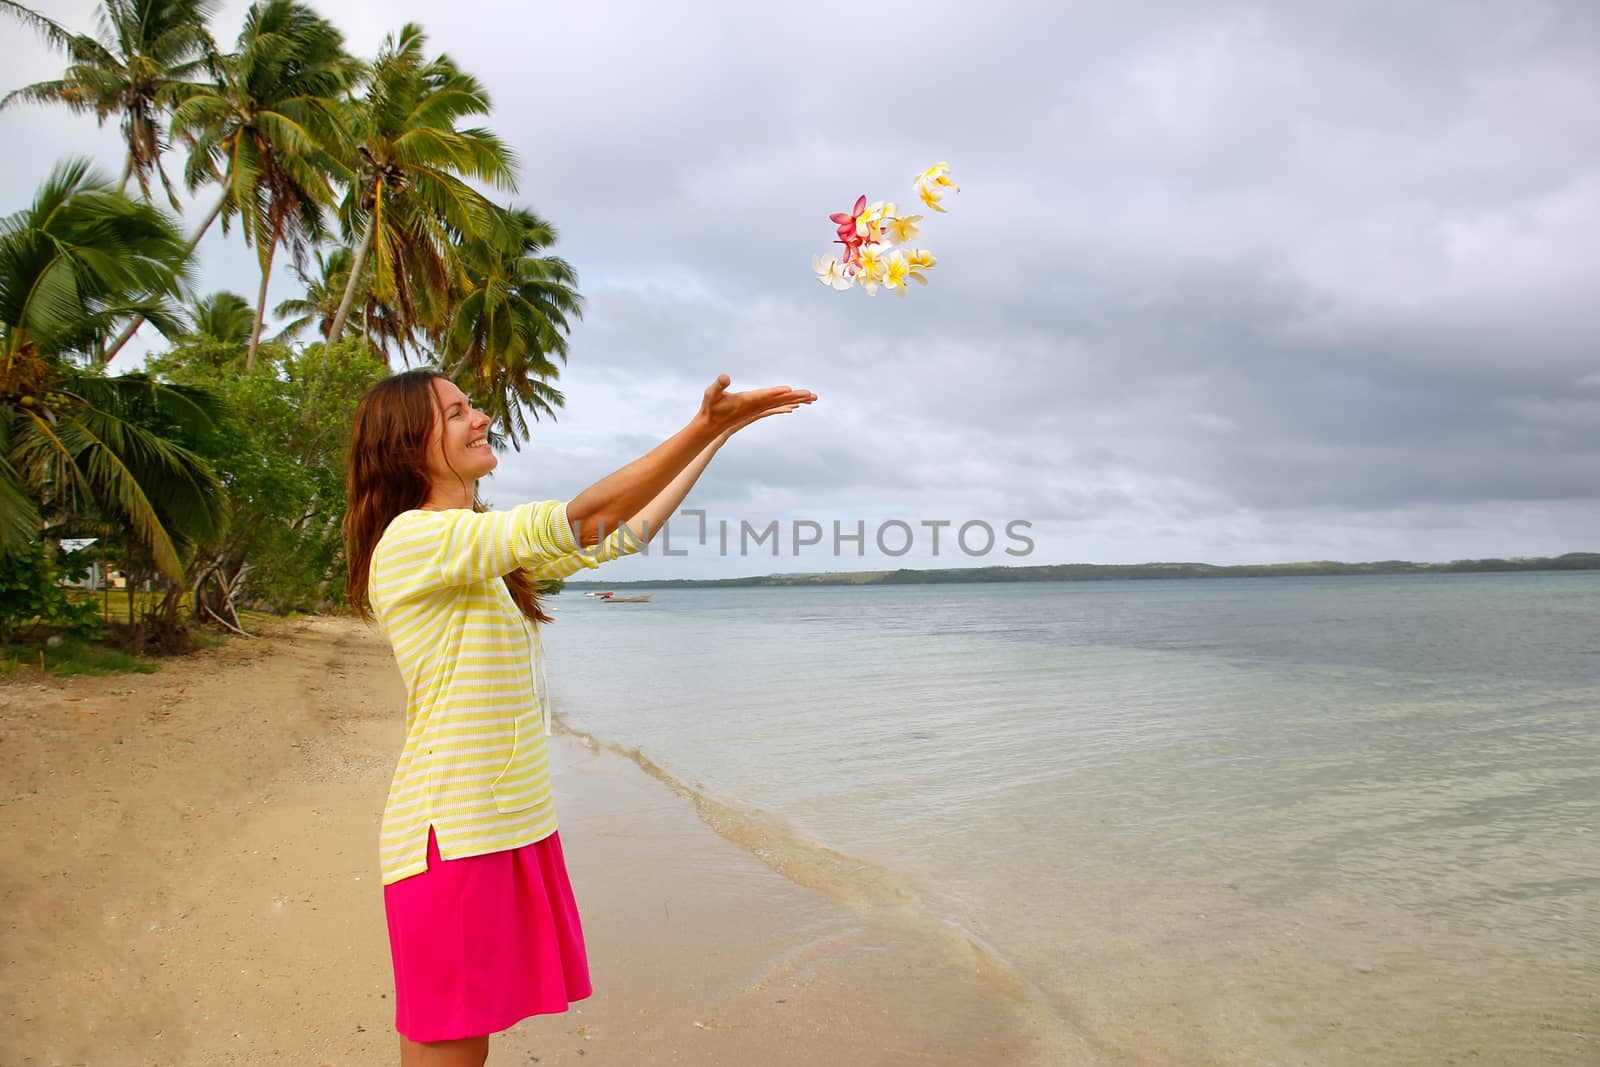 Young woman on a beach throwing flowers in the air by donya_nedomam